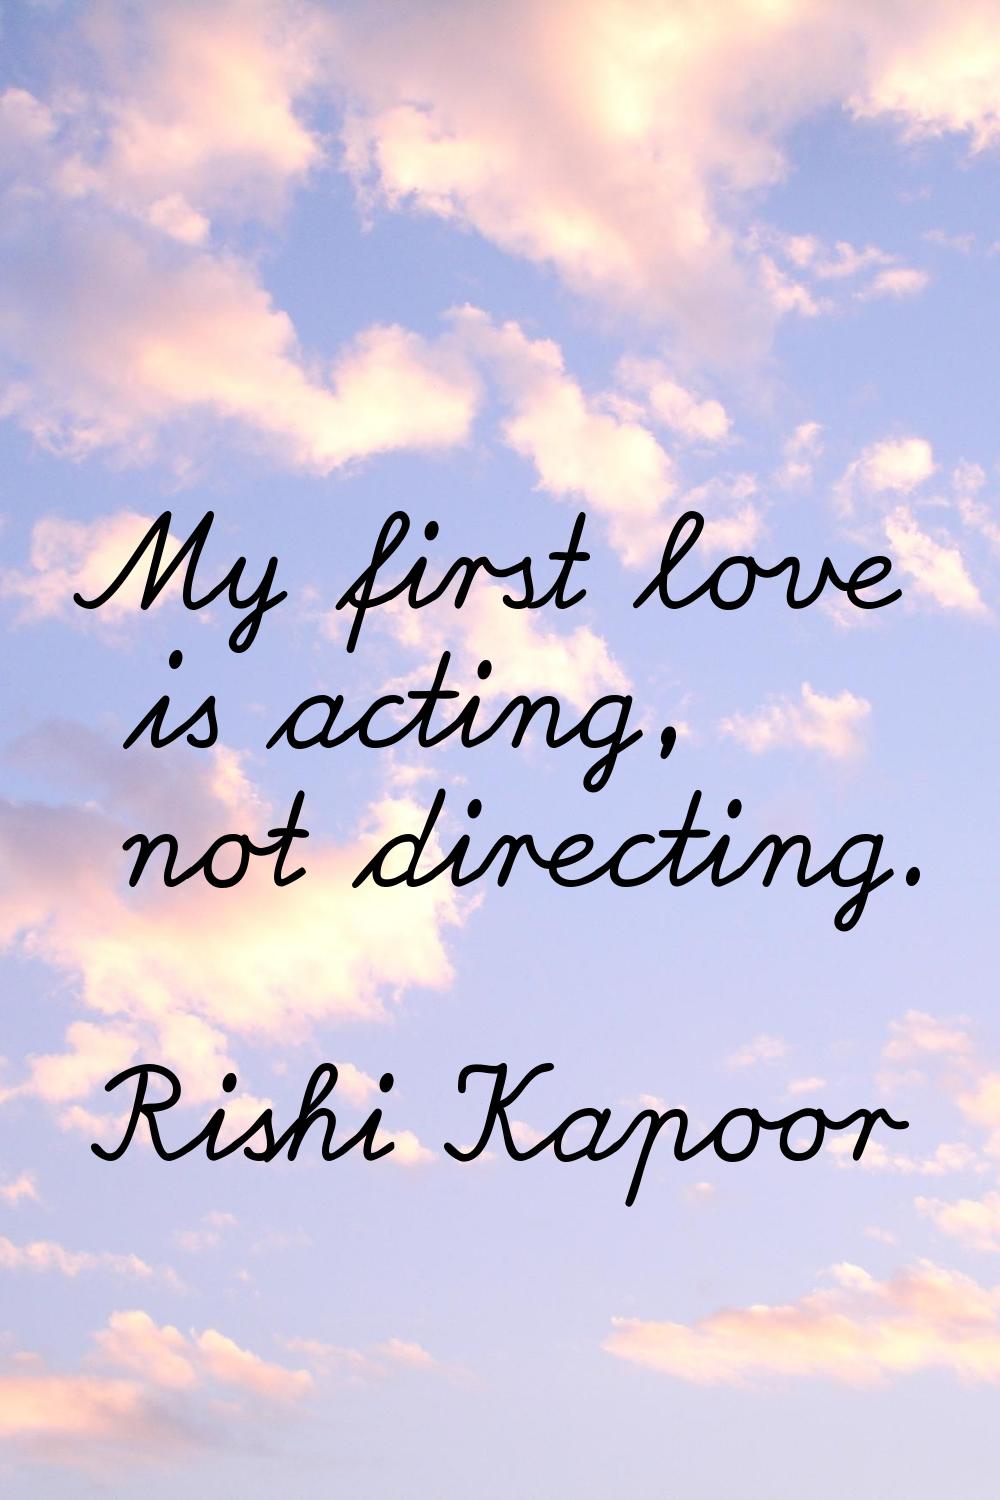 My first love is acting, not directing.